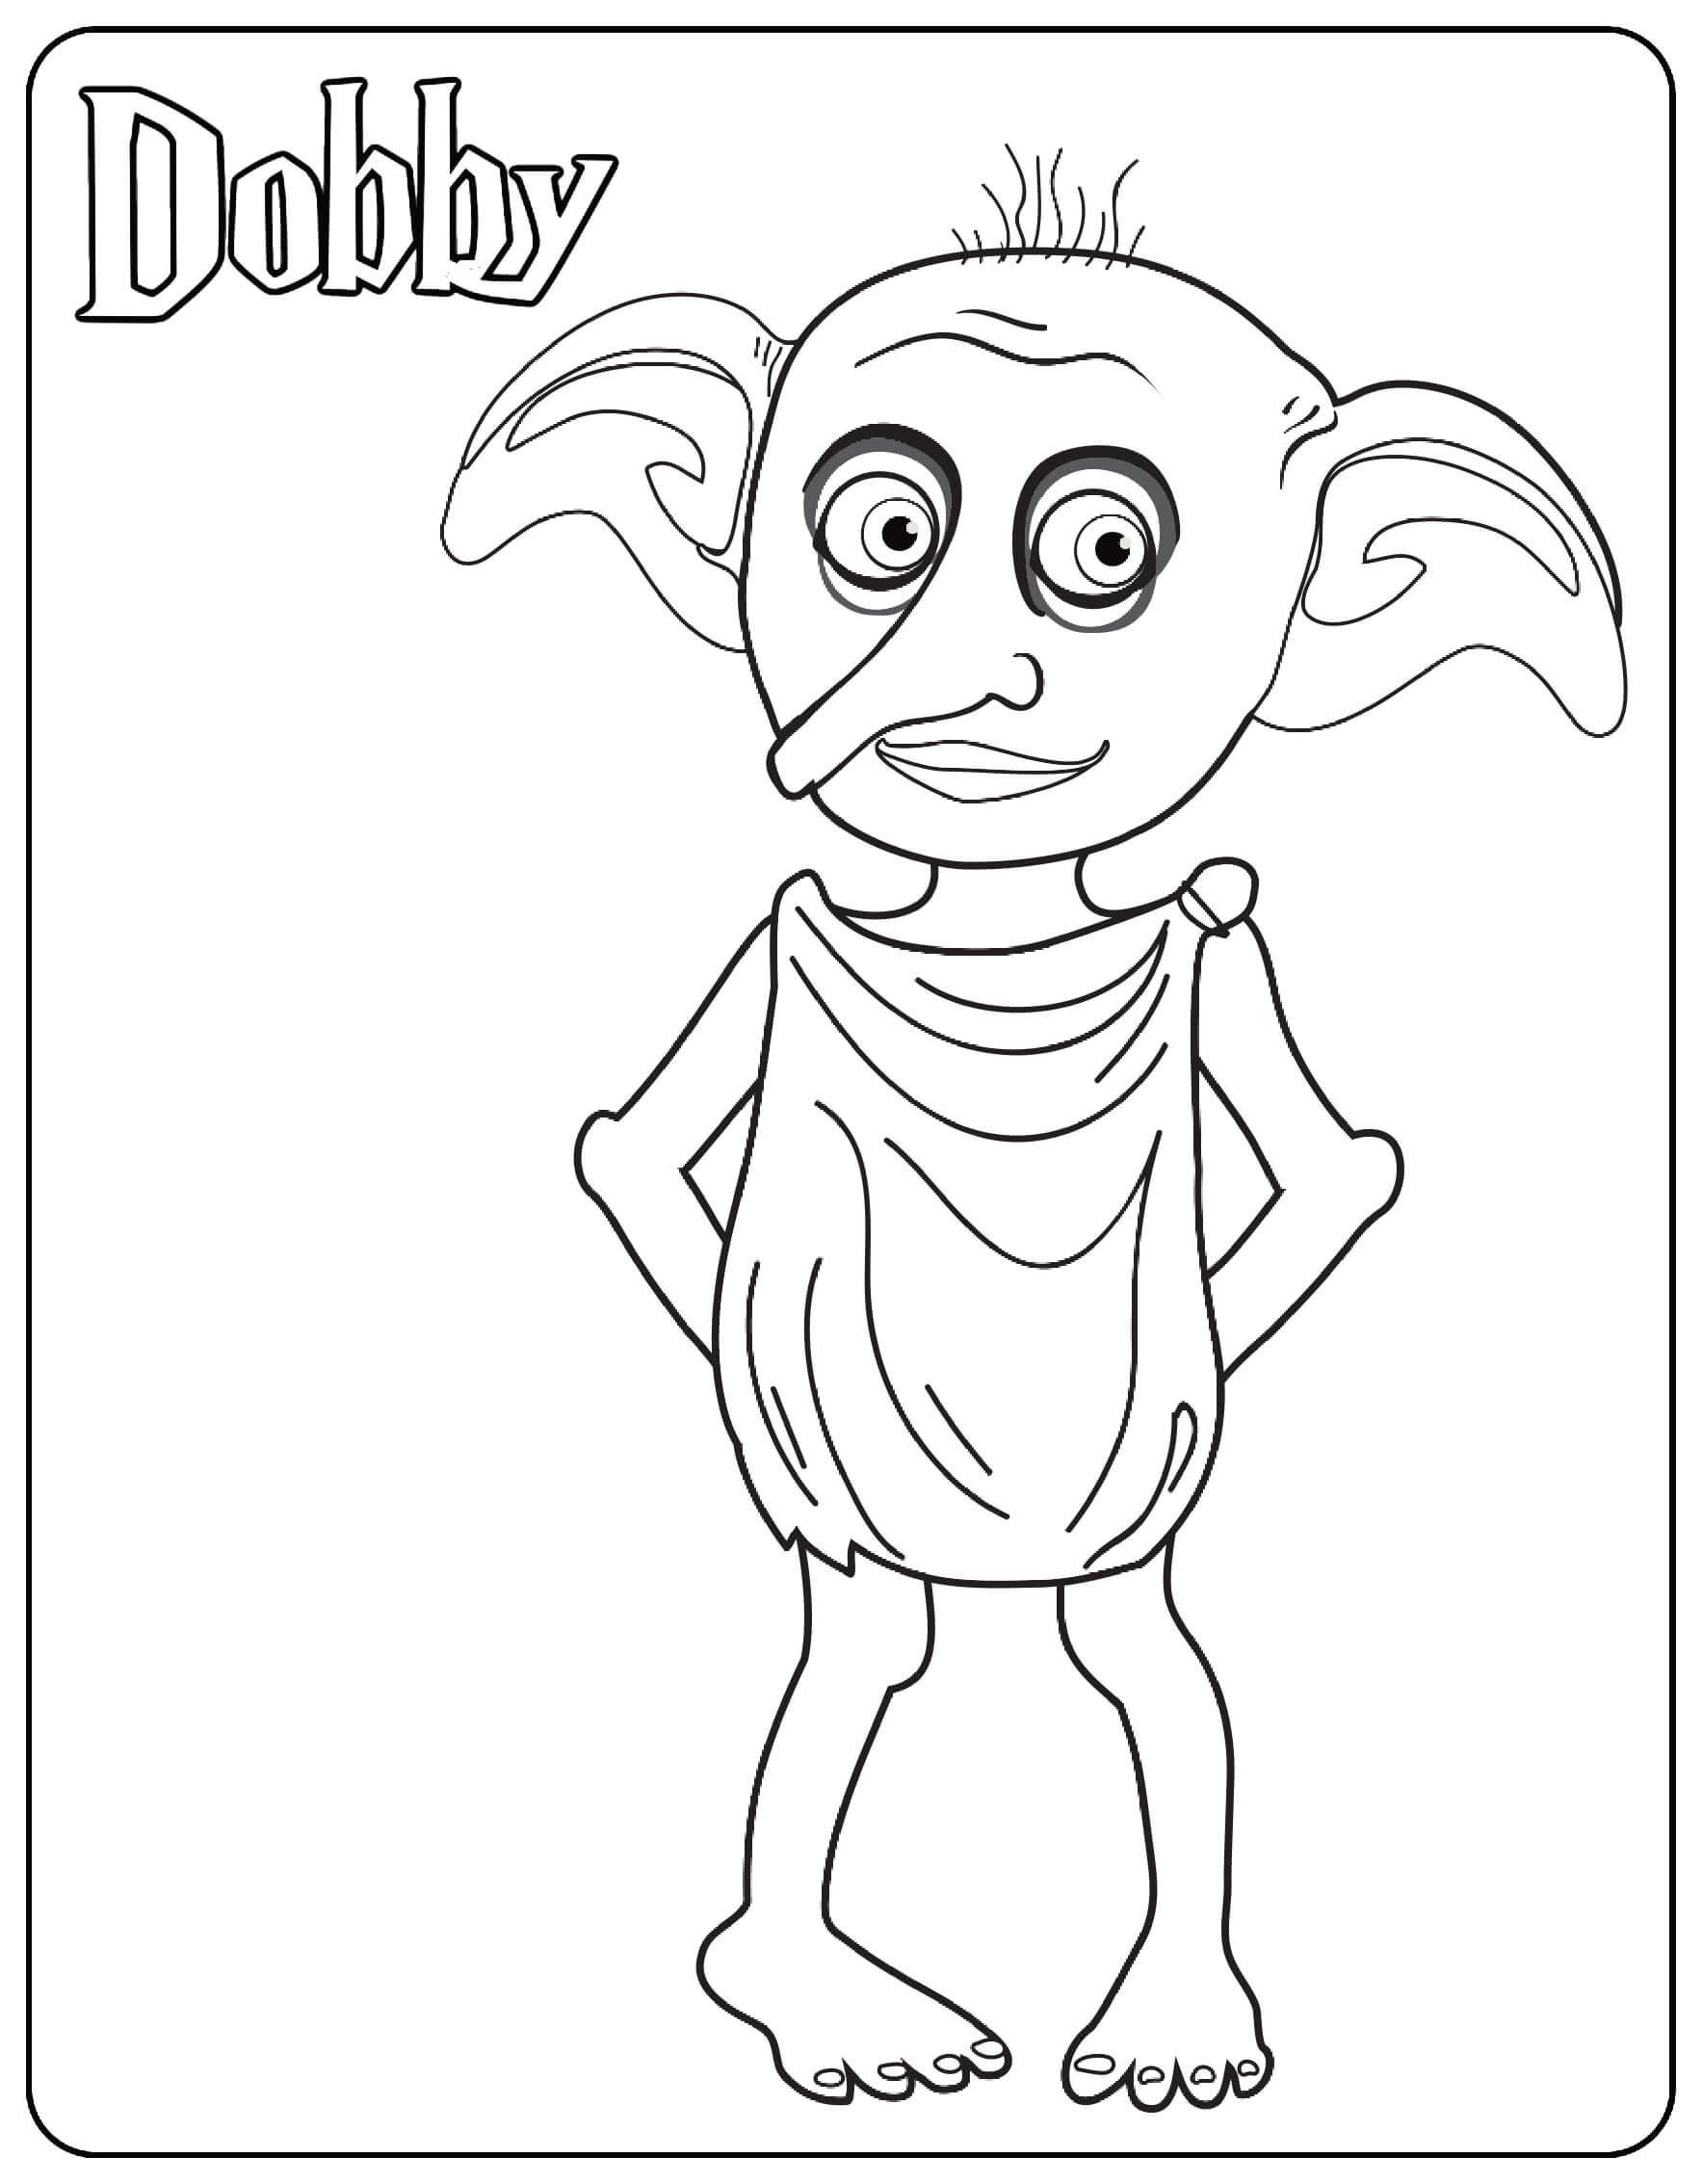 Dobby Coloring Page